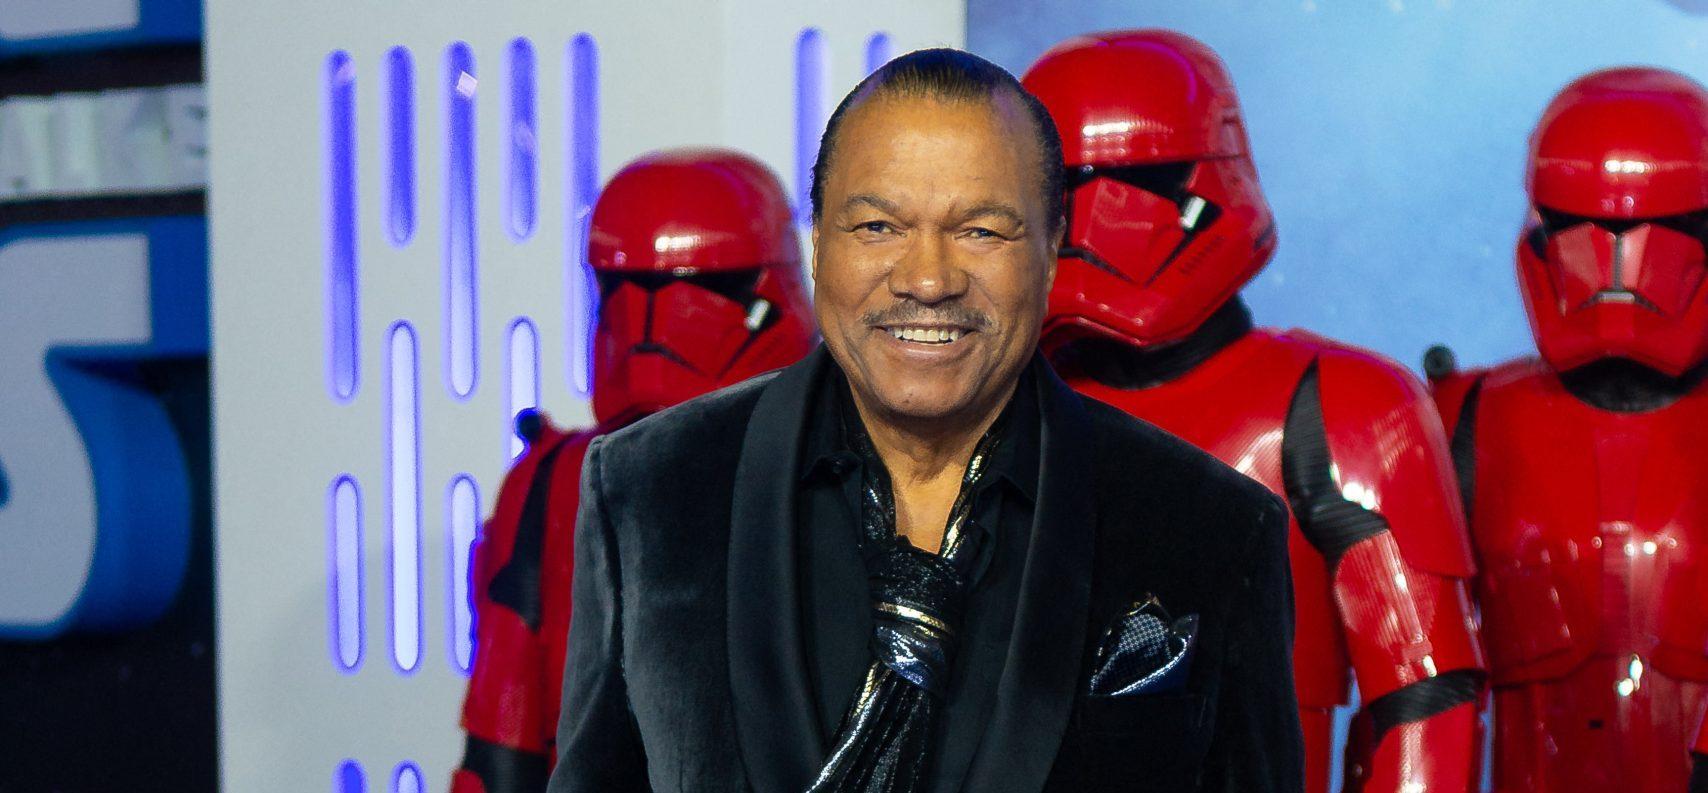 Billy Dee Williams at the Star Wars The rise of Skywalker European Premiere, Leicester Square, London, UK